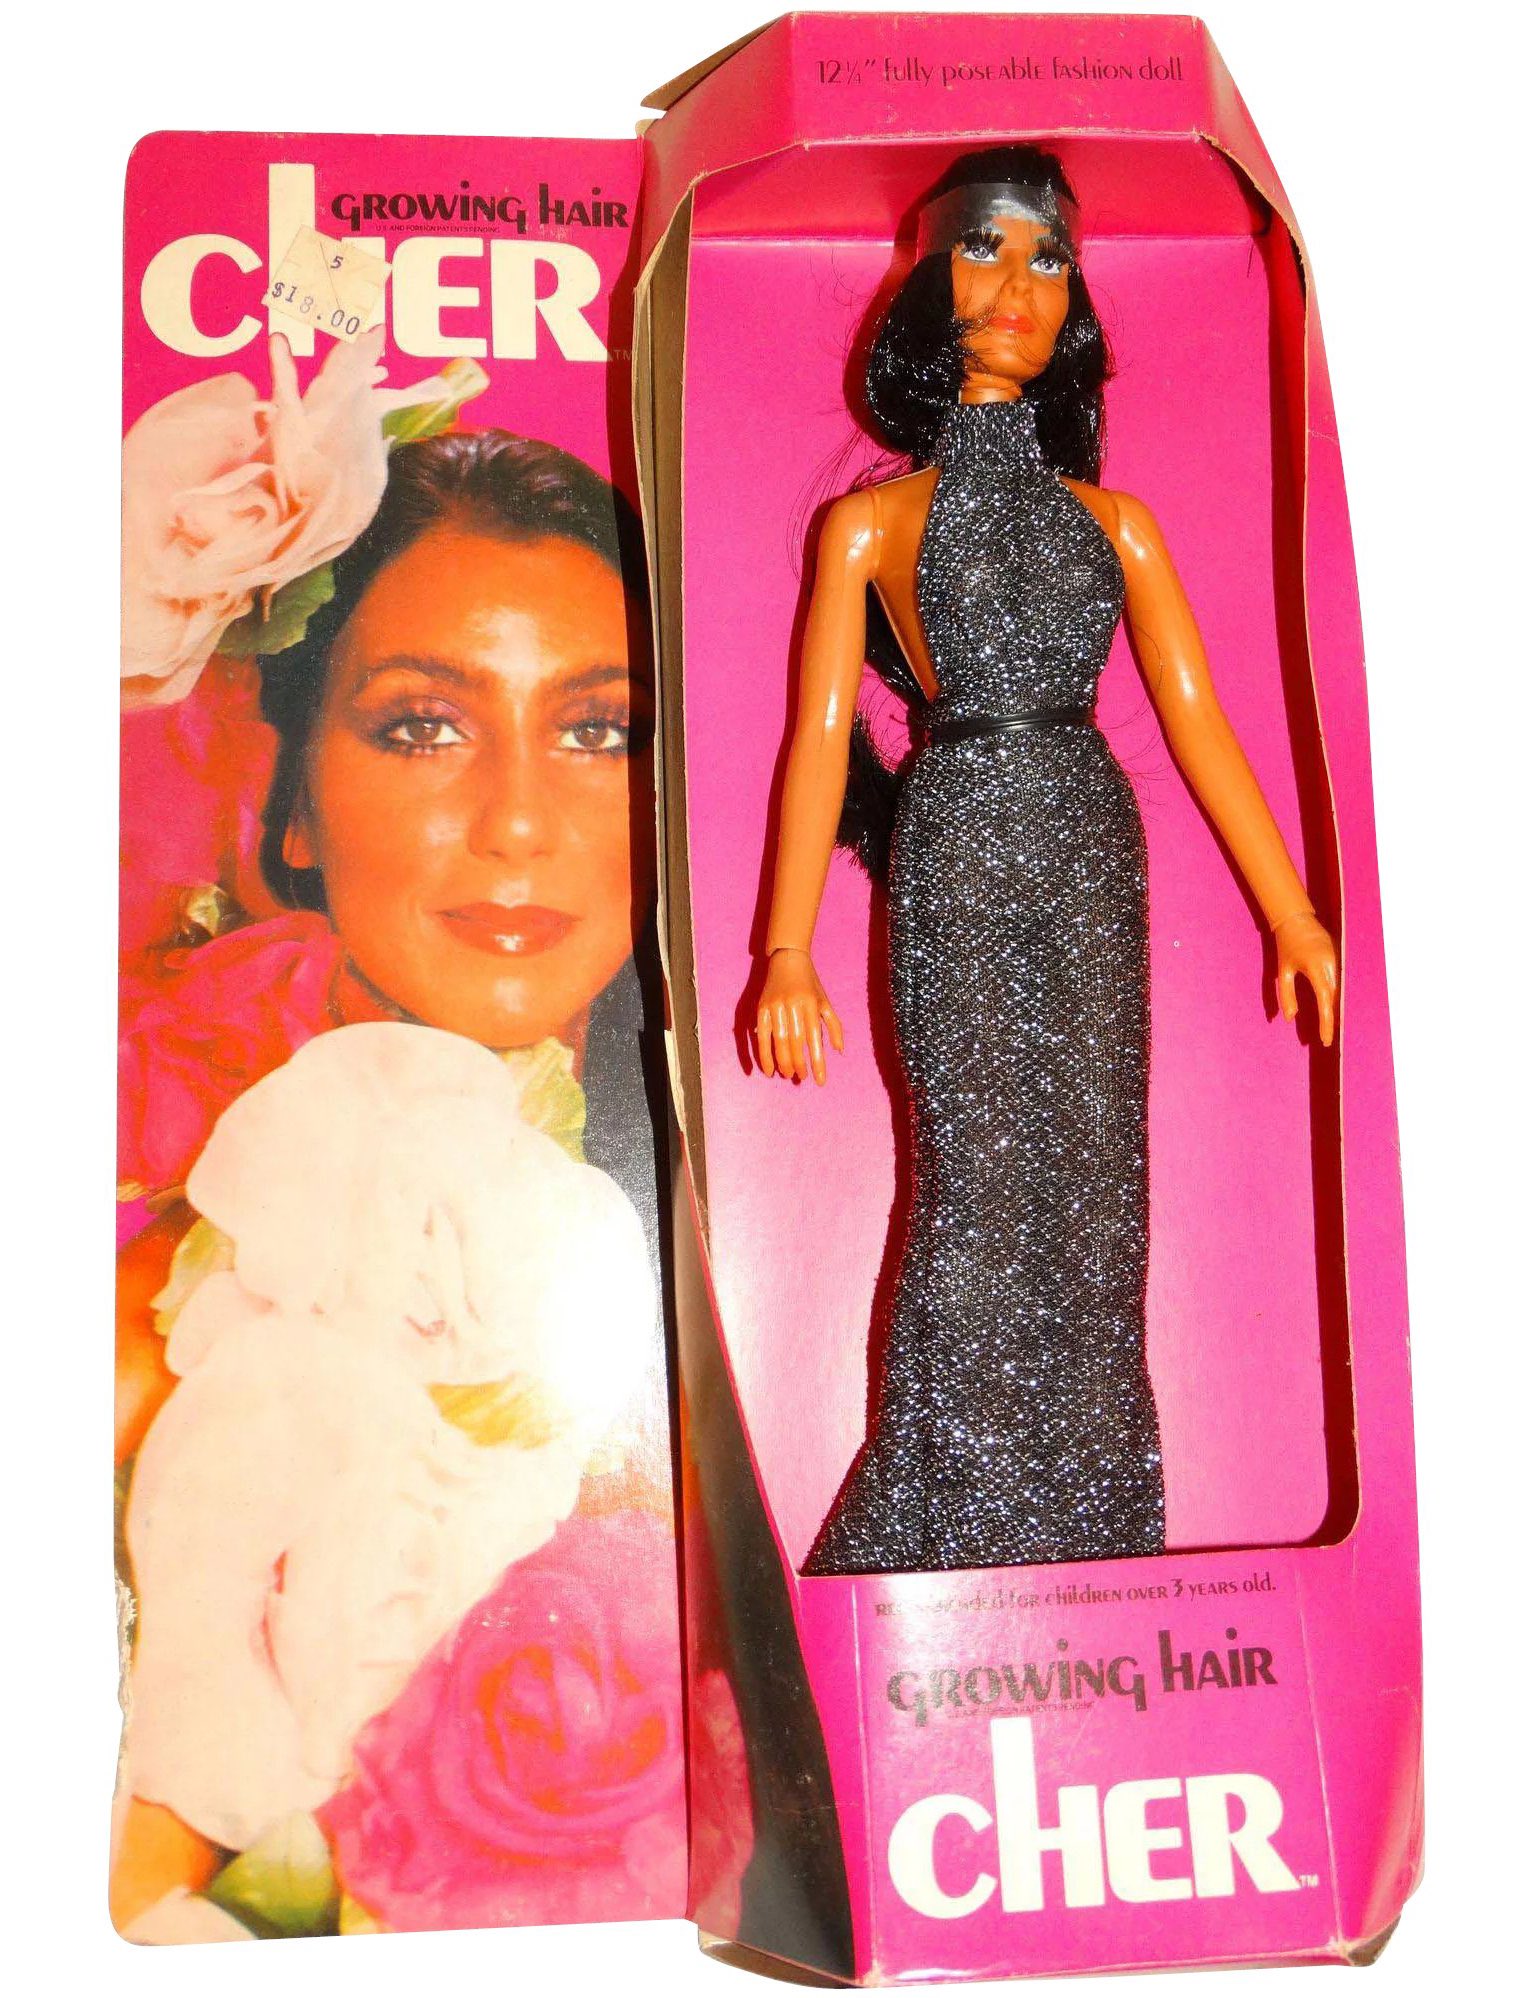 web verdund worstelen 🌊 Endless Summer ☀️ on Twitter: "Fun fact: The Cher doll complete with a  full line of Mackie clothes, home and stage playsets, ended up being the  highest selling doll of 1976,